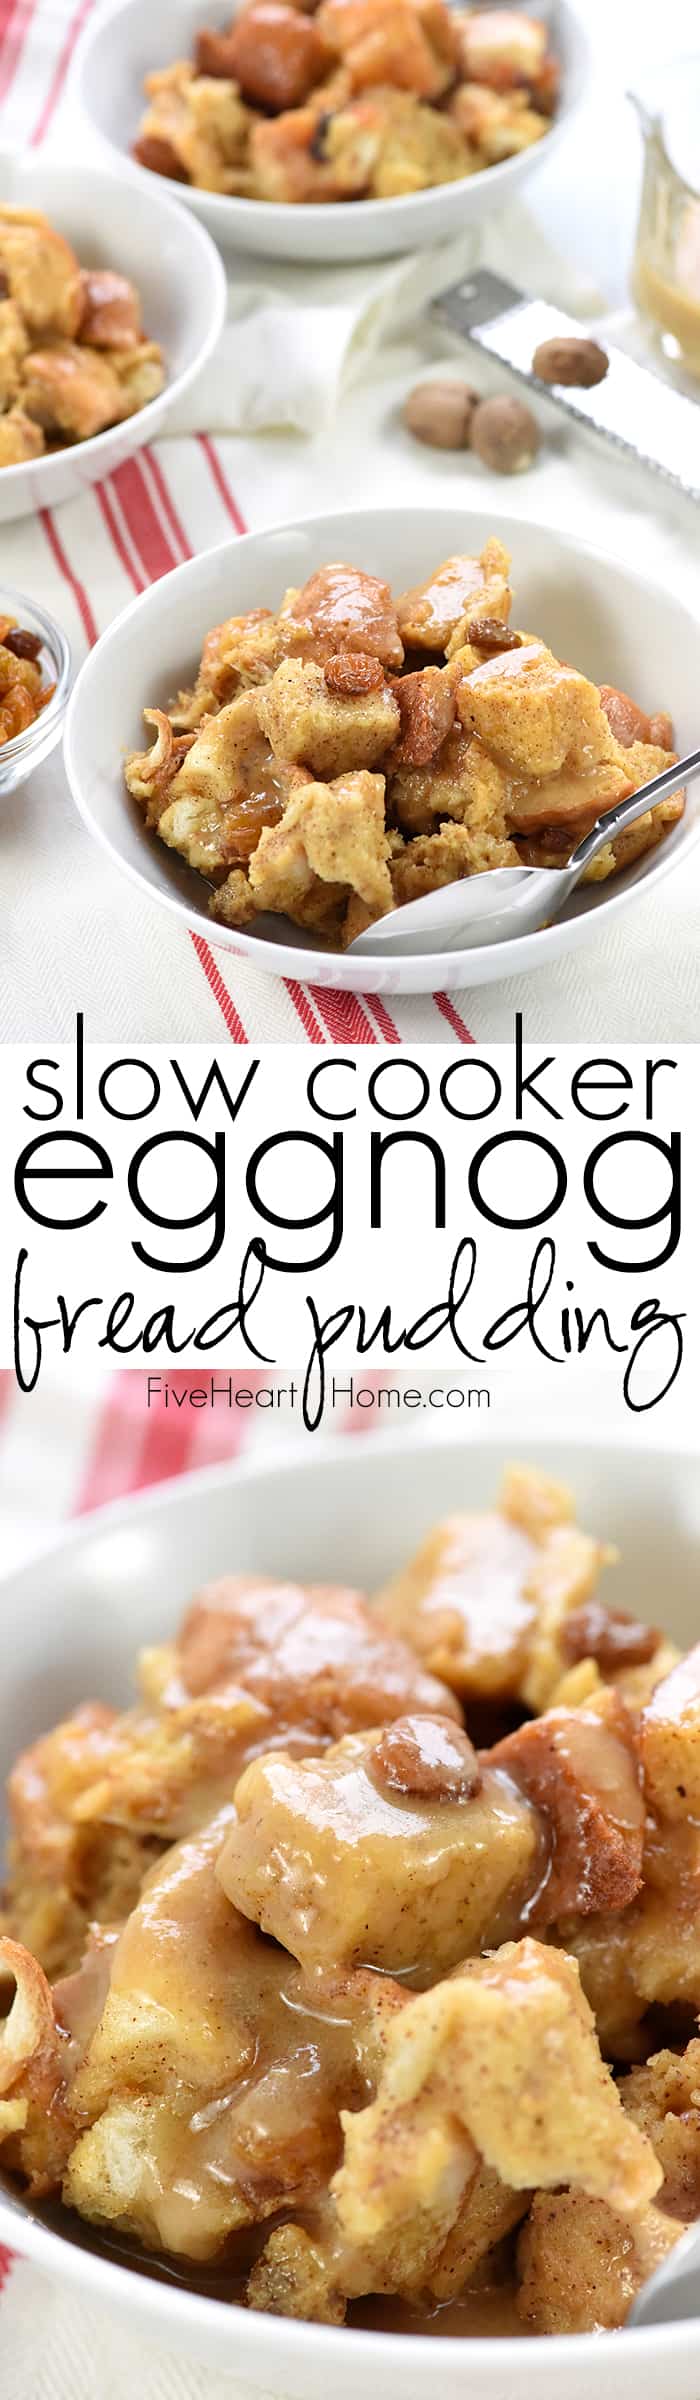 Slow Cooker Eggnog Bread Pudding Collage with Text Overlay 